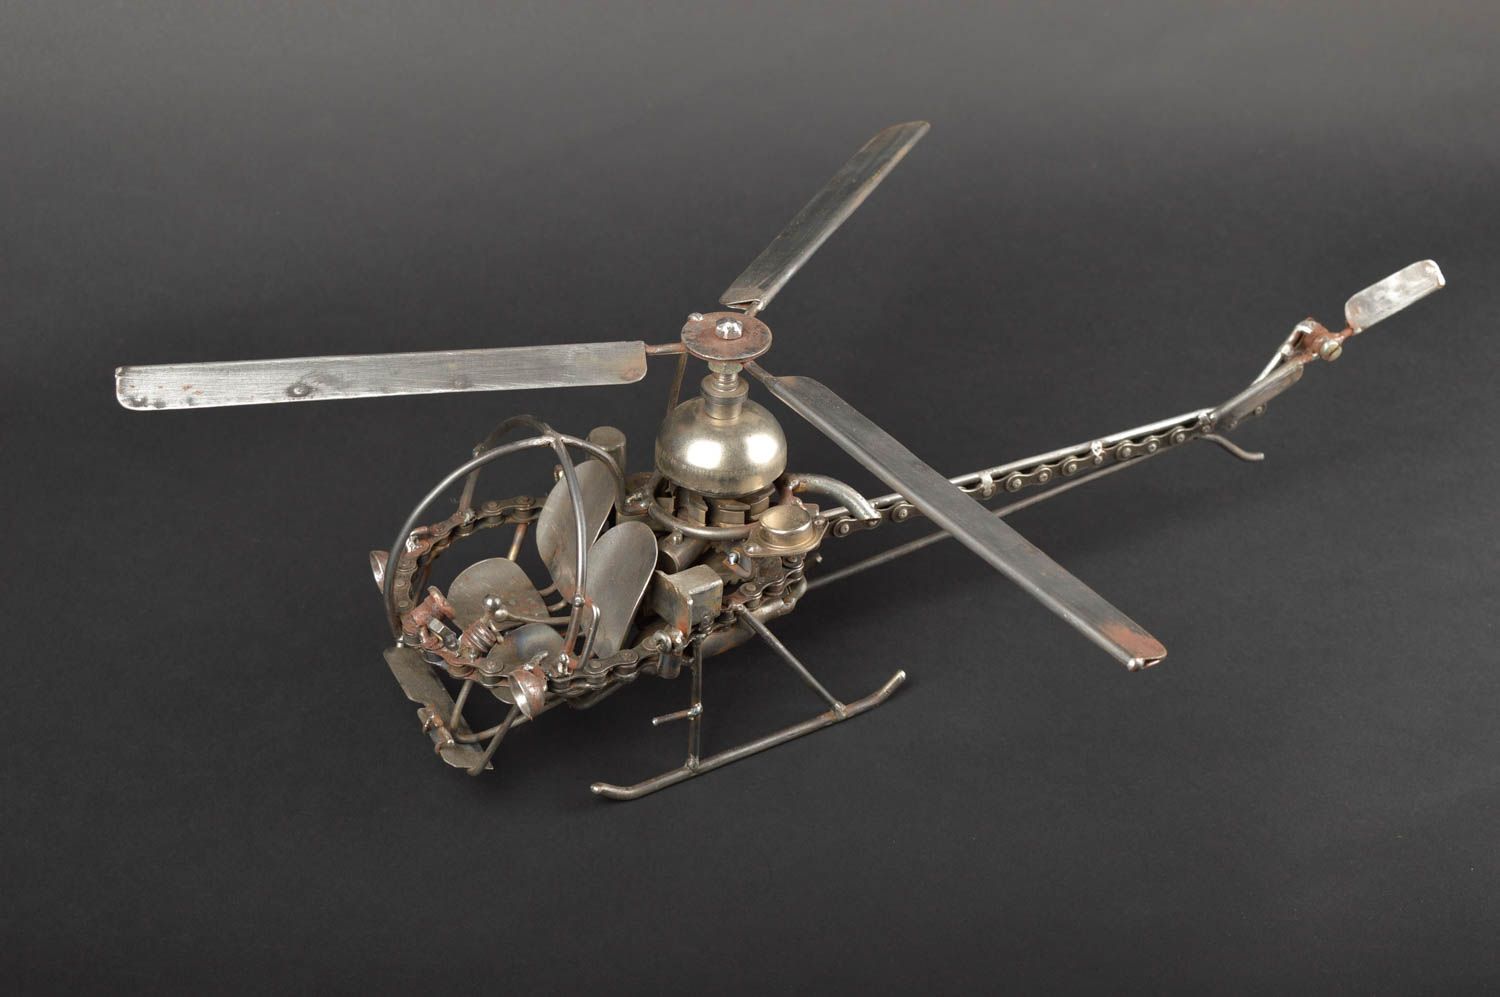 Handmade metal figurine helicopter model for decorative use only gifts for him photo 1